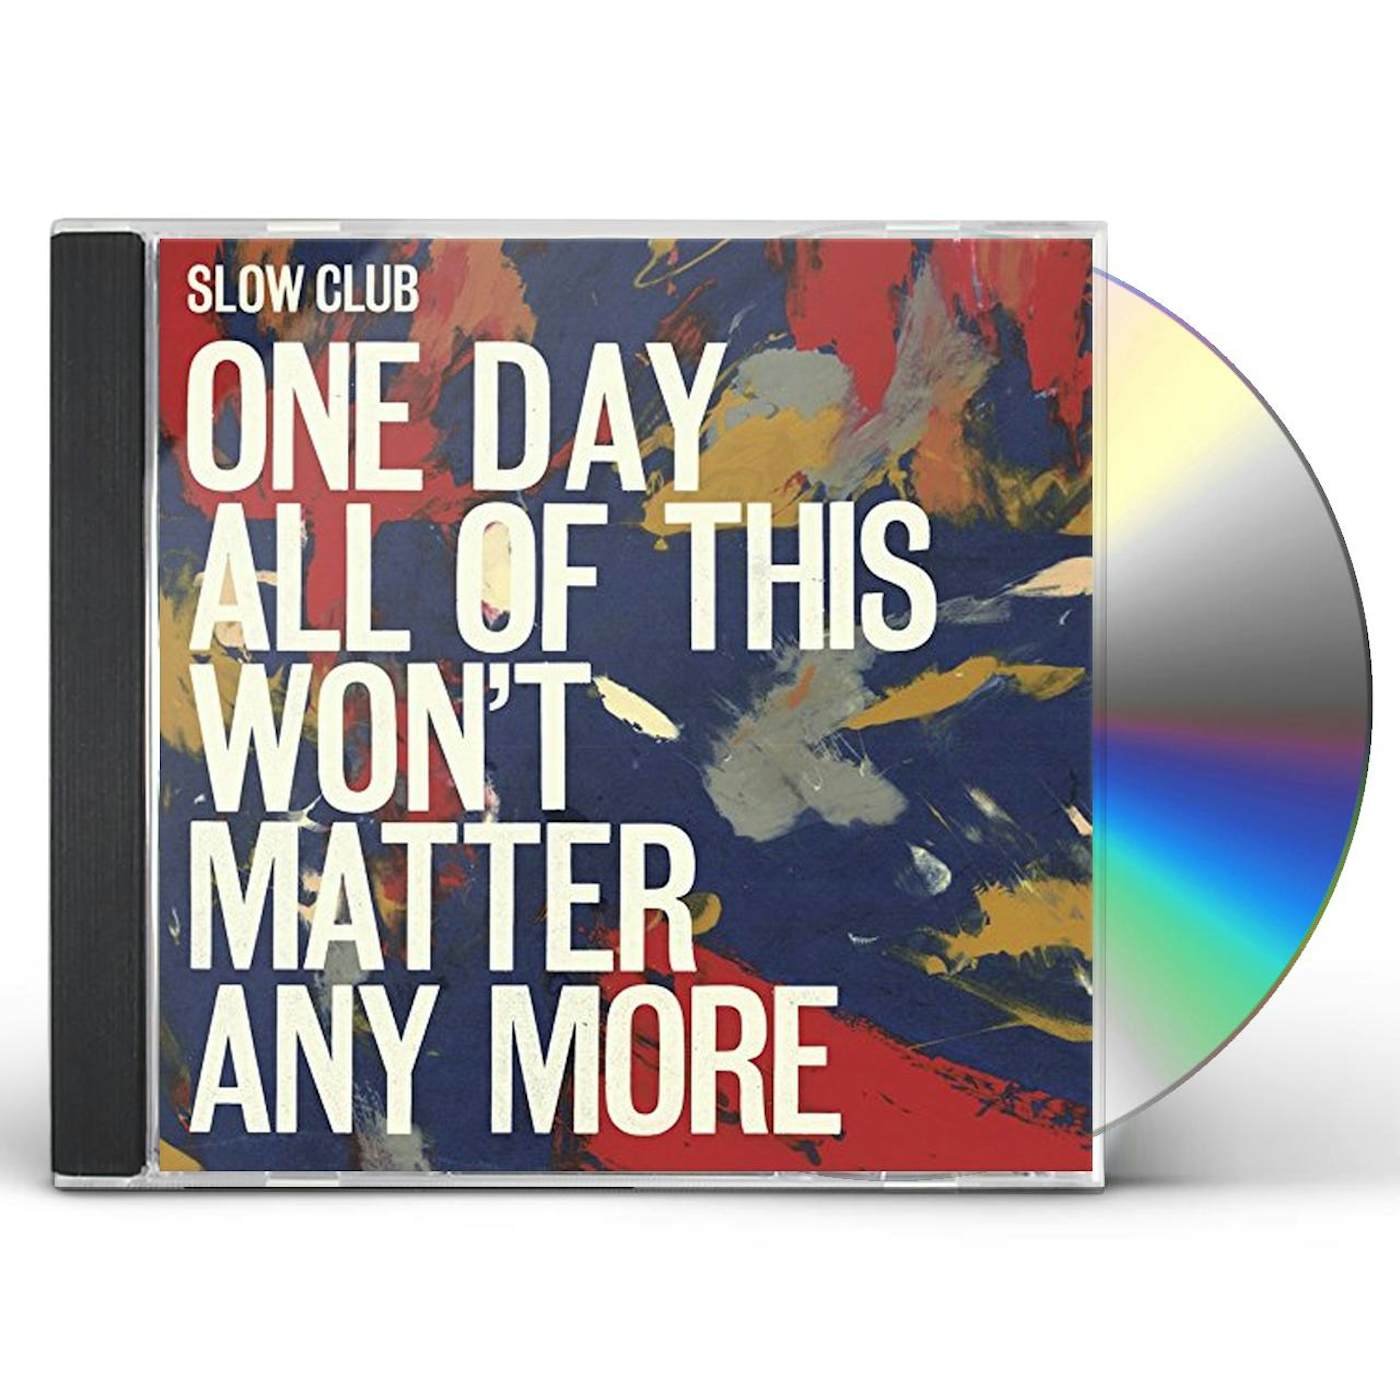 Slow Club ONE DAY ALL OF THIS WONT MATTER ANY MORE CD